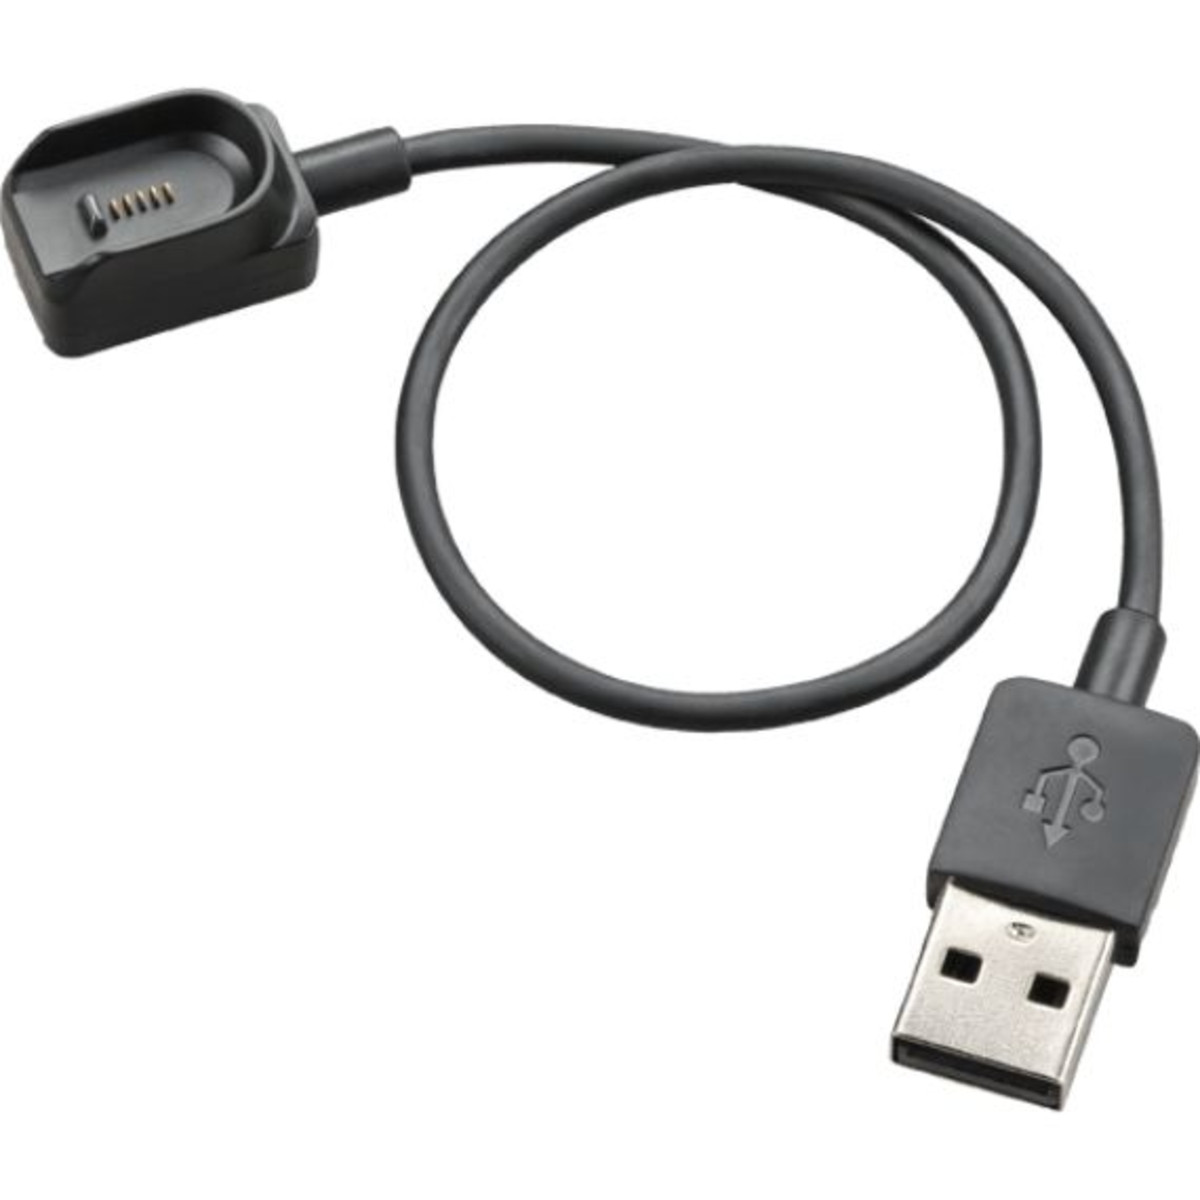 Plantronics Spare USB Charging Cable For Voyager Legend (p/n- 89032-01)